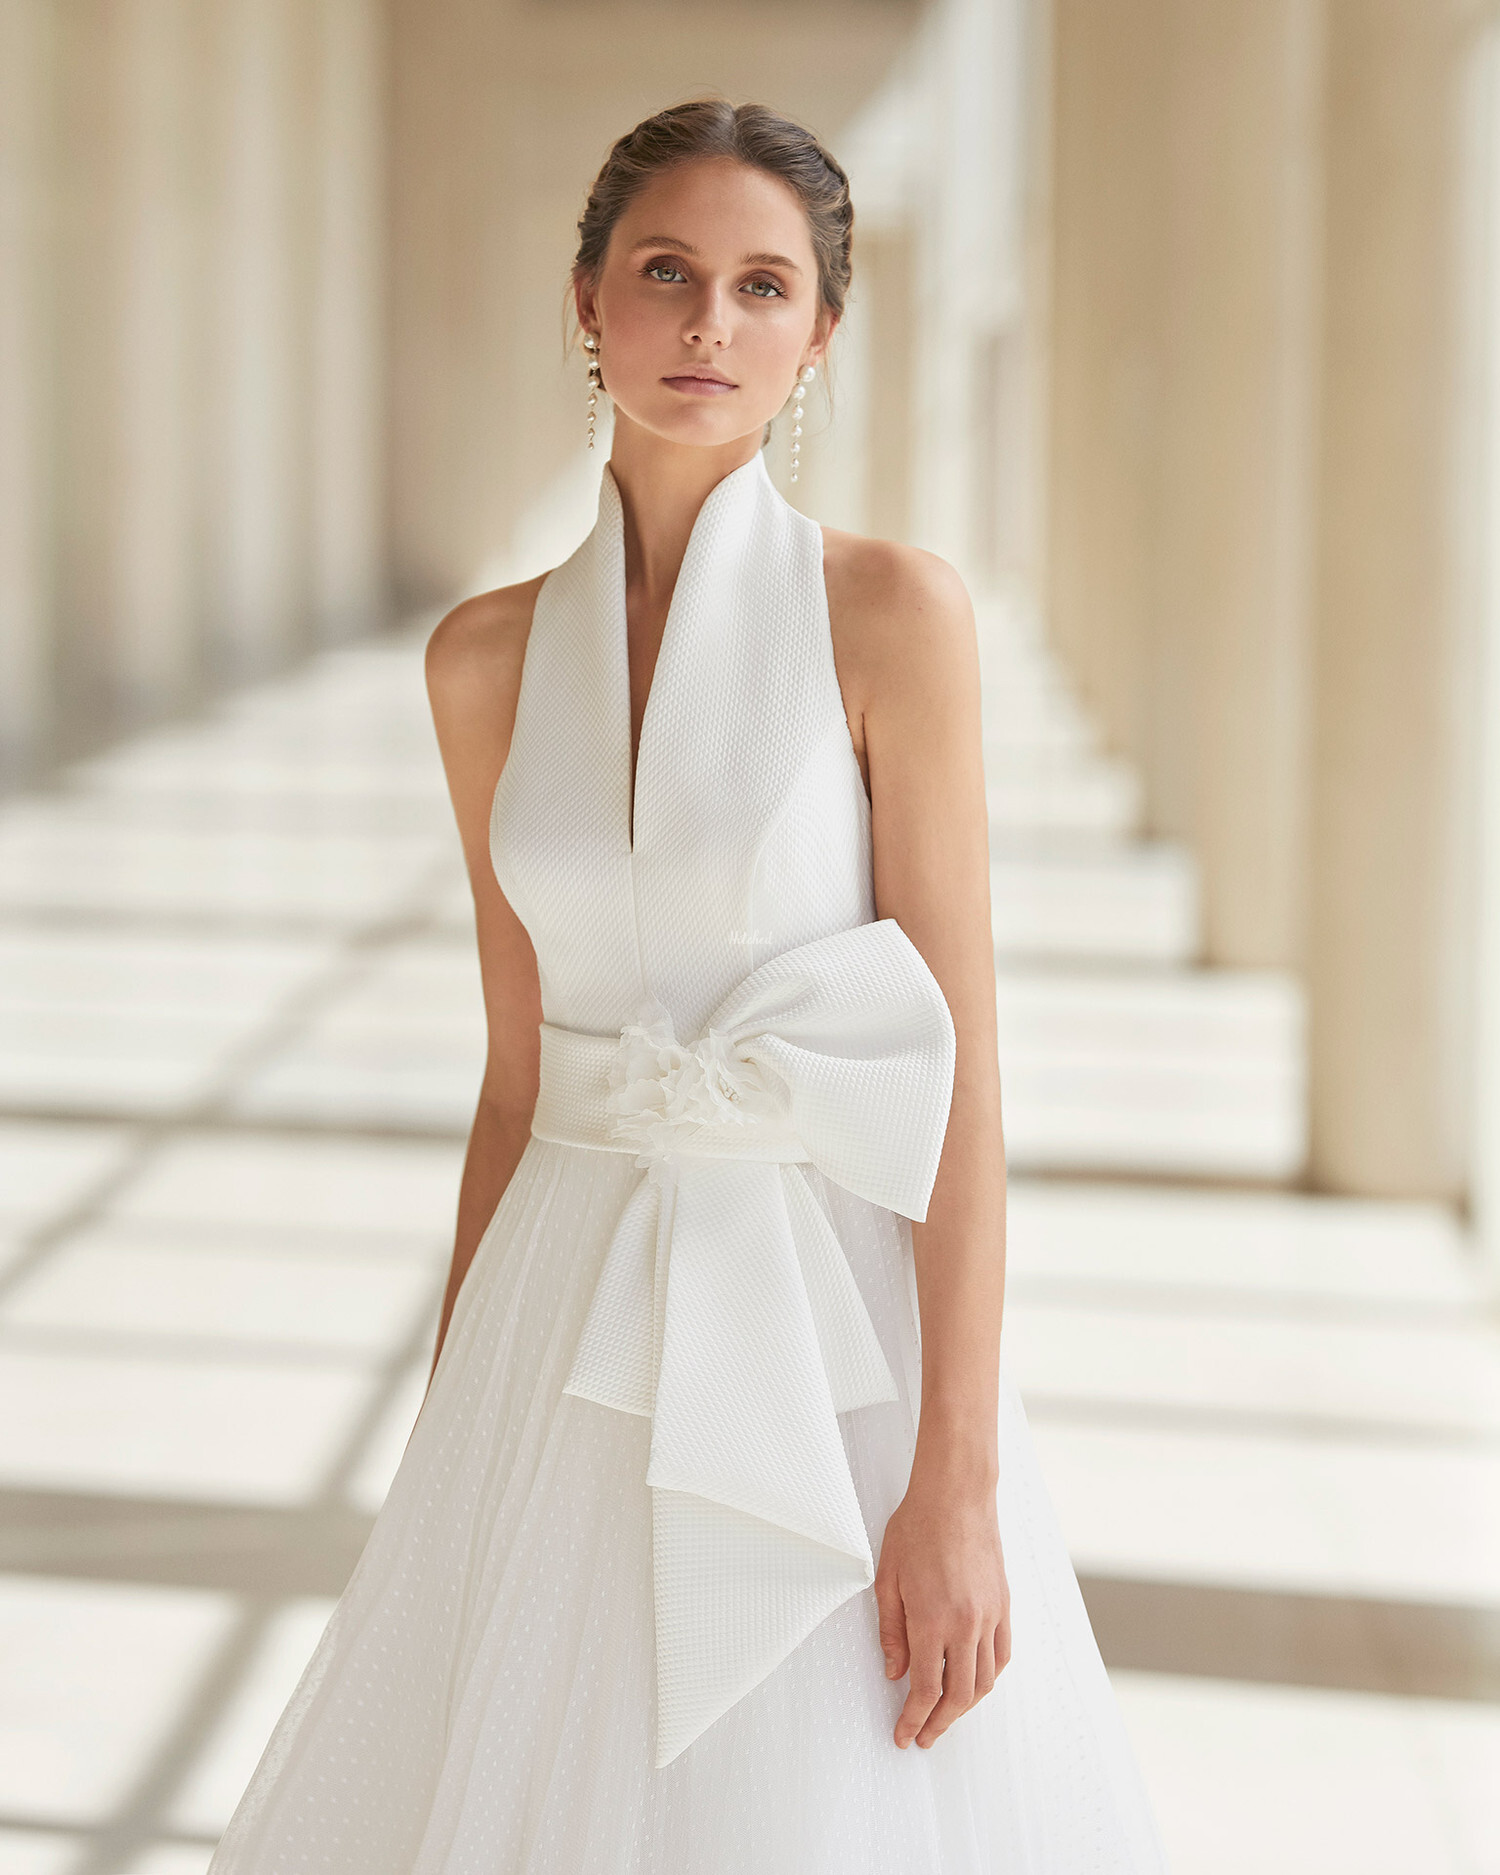 UDAY Wedding Dress from Aire Barcelona - hitched.co.uk